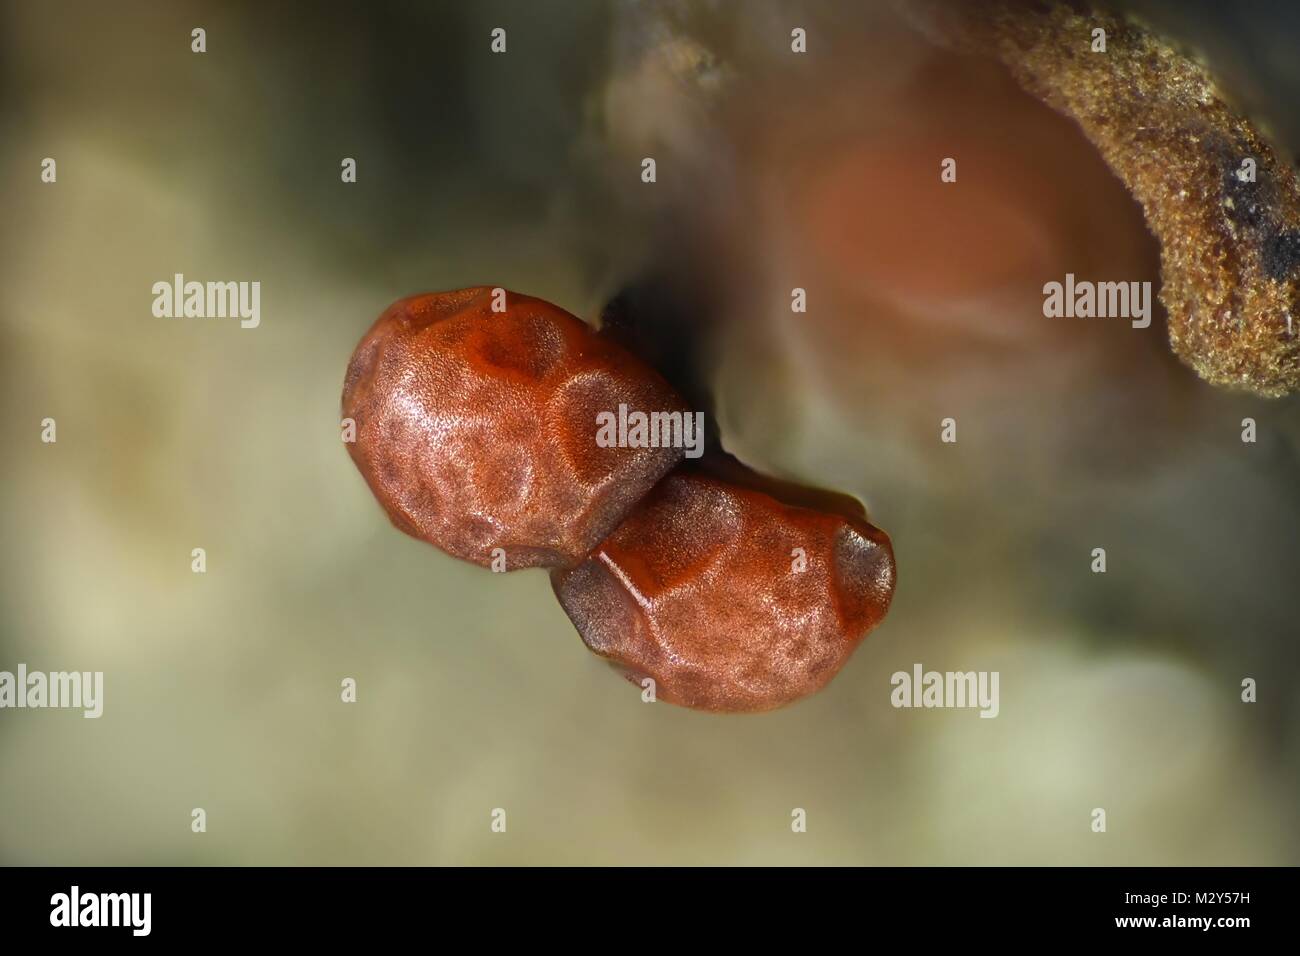 Hairy slime mold, Trichia varia, a microscope image.   Field of view of the image is 3 mm. Stock Photo